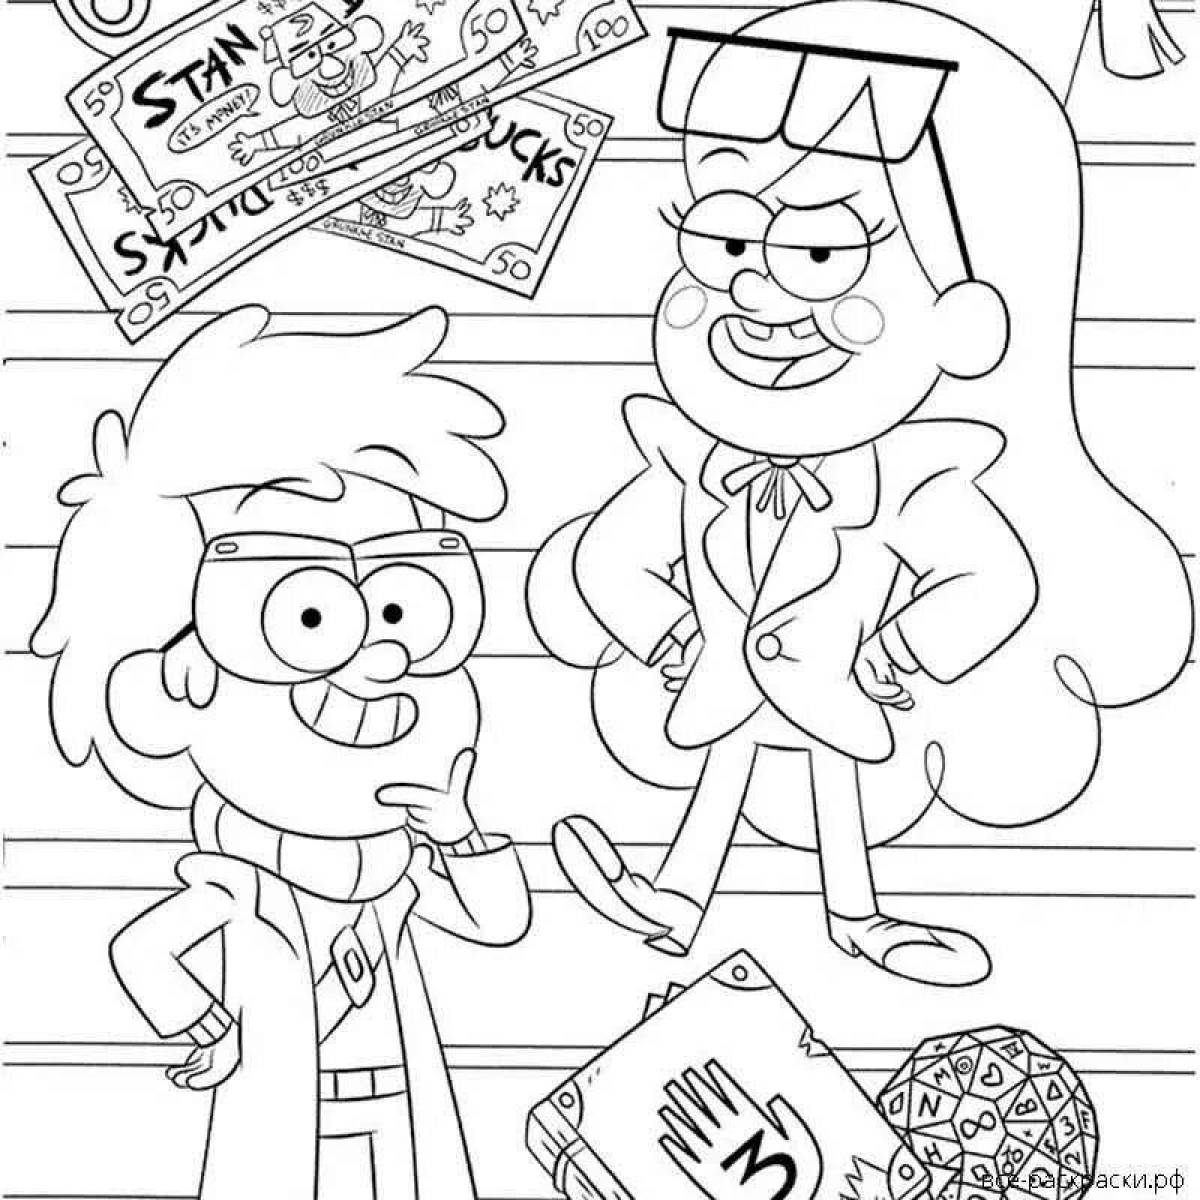 Coloring lively mabel and dipper